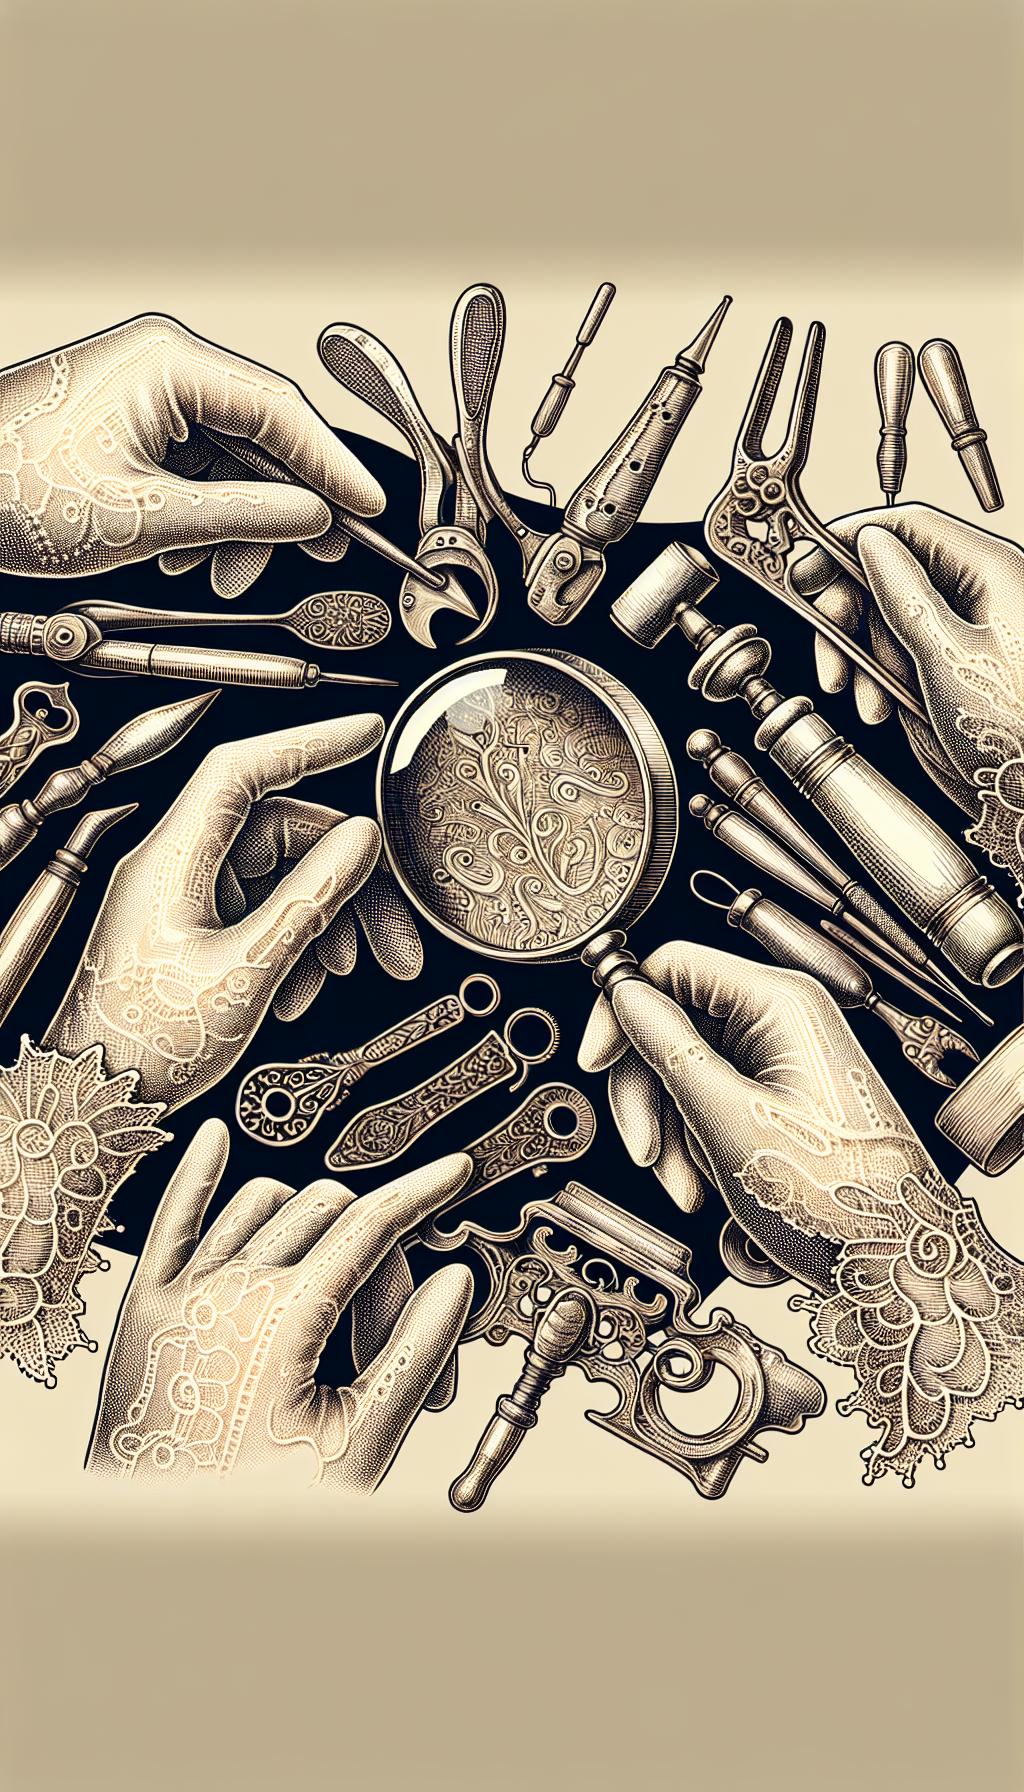 An intricately outlined pair of hands, donned in vintage lace gloves, cradles a collection of whimsical, sketched antique hand tools, each labeled with delicate, cursive names. Amidst them, a magnifying glass hovers, scrutinizing the filigree-engraved surface of a peculiar, unidentified tool, symbolizing the meticulous identification process of unusual antiques in a montage of discovery and preservation.